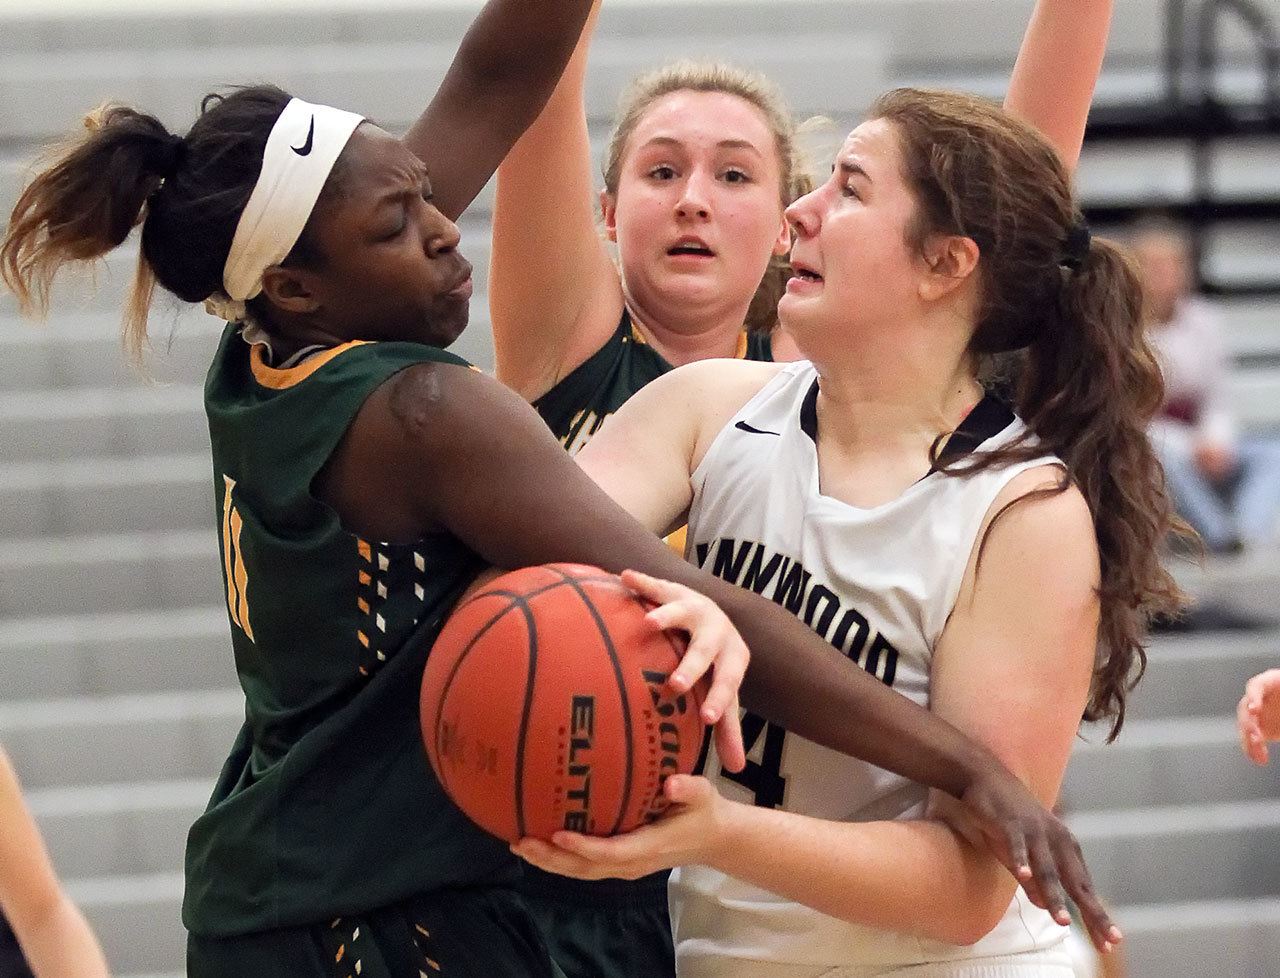 Lynnwood’s Kelsey Rogers (right) struggles for a shot attempt with Shorecrest’s Jazlyn Owens (left) and Audrey Dietz (rear) defending on Wednesday night at Lynnwood High School. Lynnwood won 48-32. (Kevin Clark / The Herald)